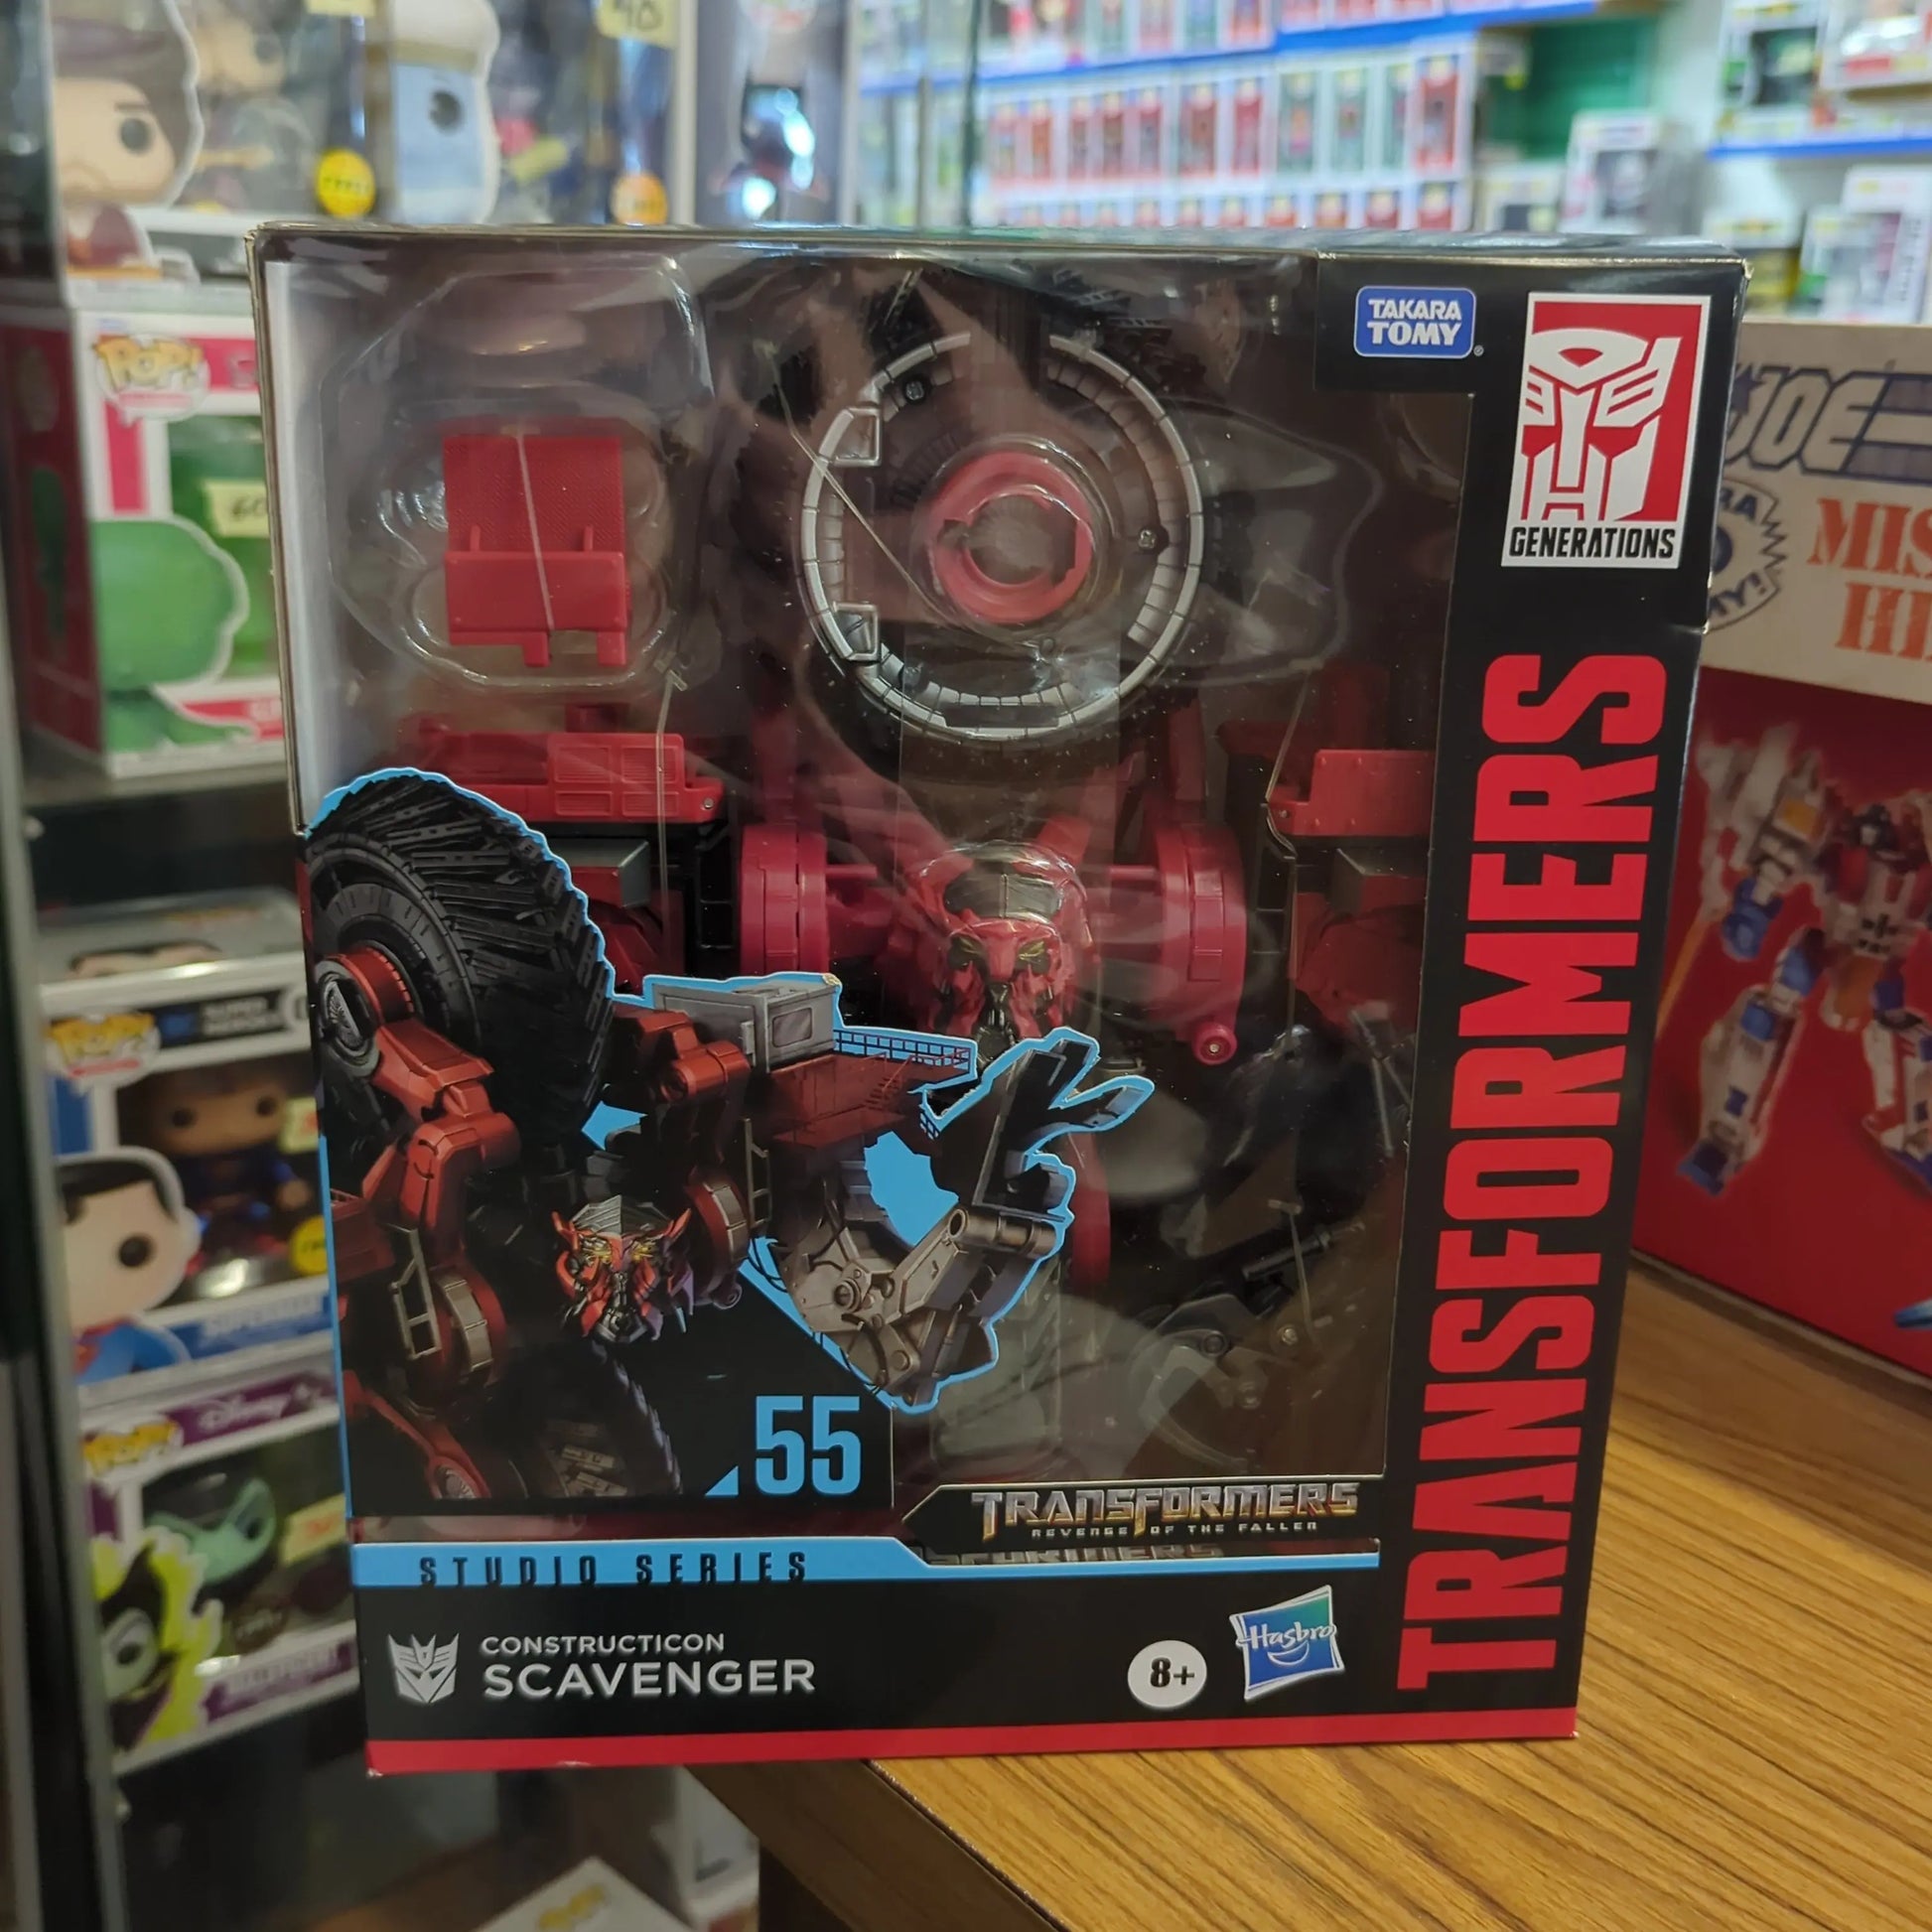 Constructicon Scavenger Transformers Generations Studio Series 8.5in Toy Figure FRENLY BRICKS - Open 7 Days